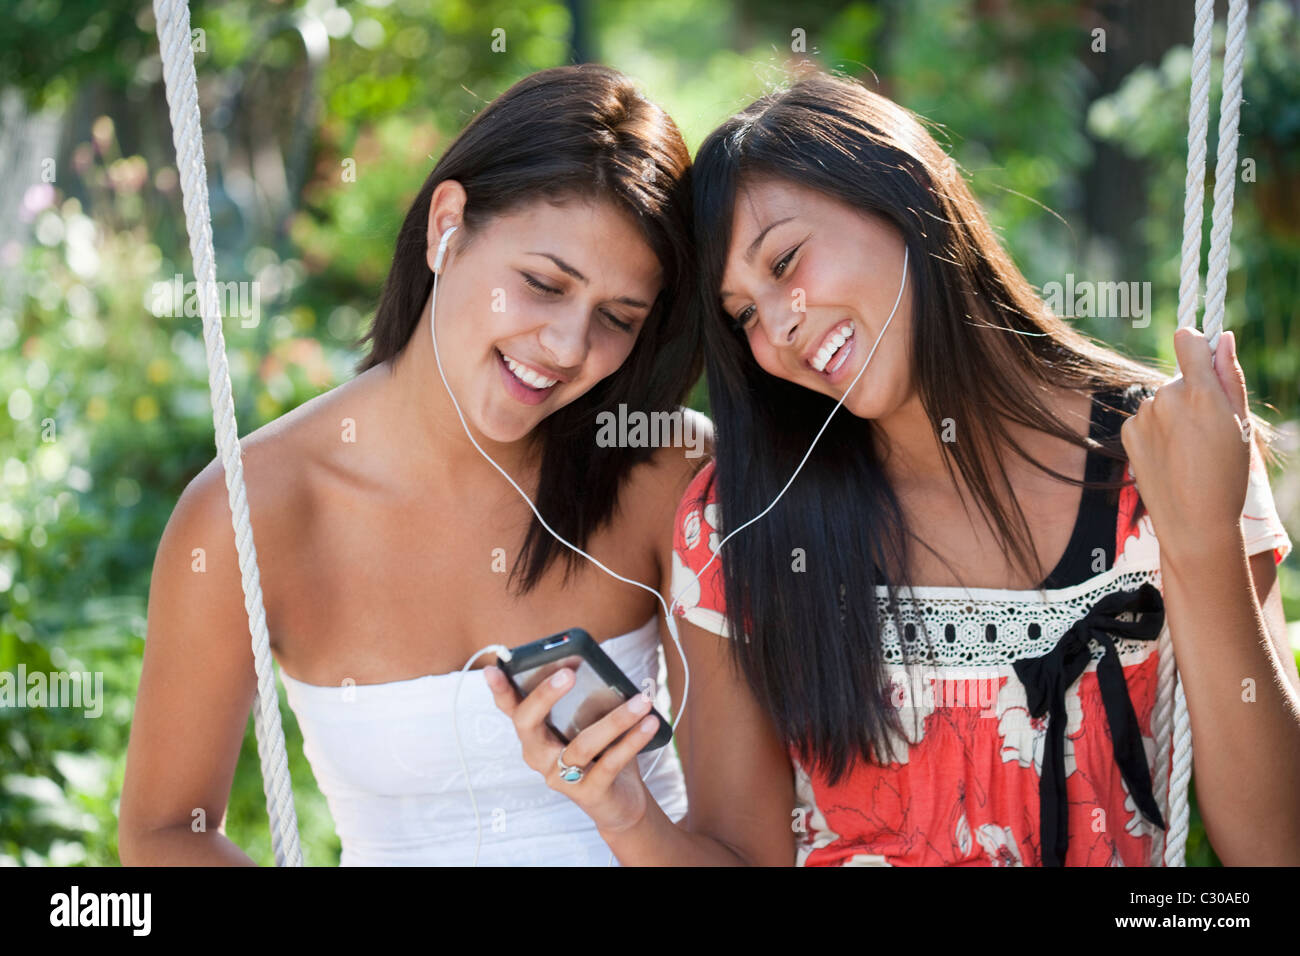 Two teenage girls sharing an MP3 player and smiling Stock Photo